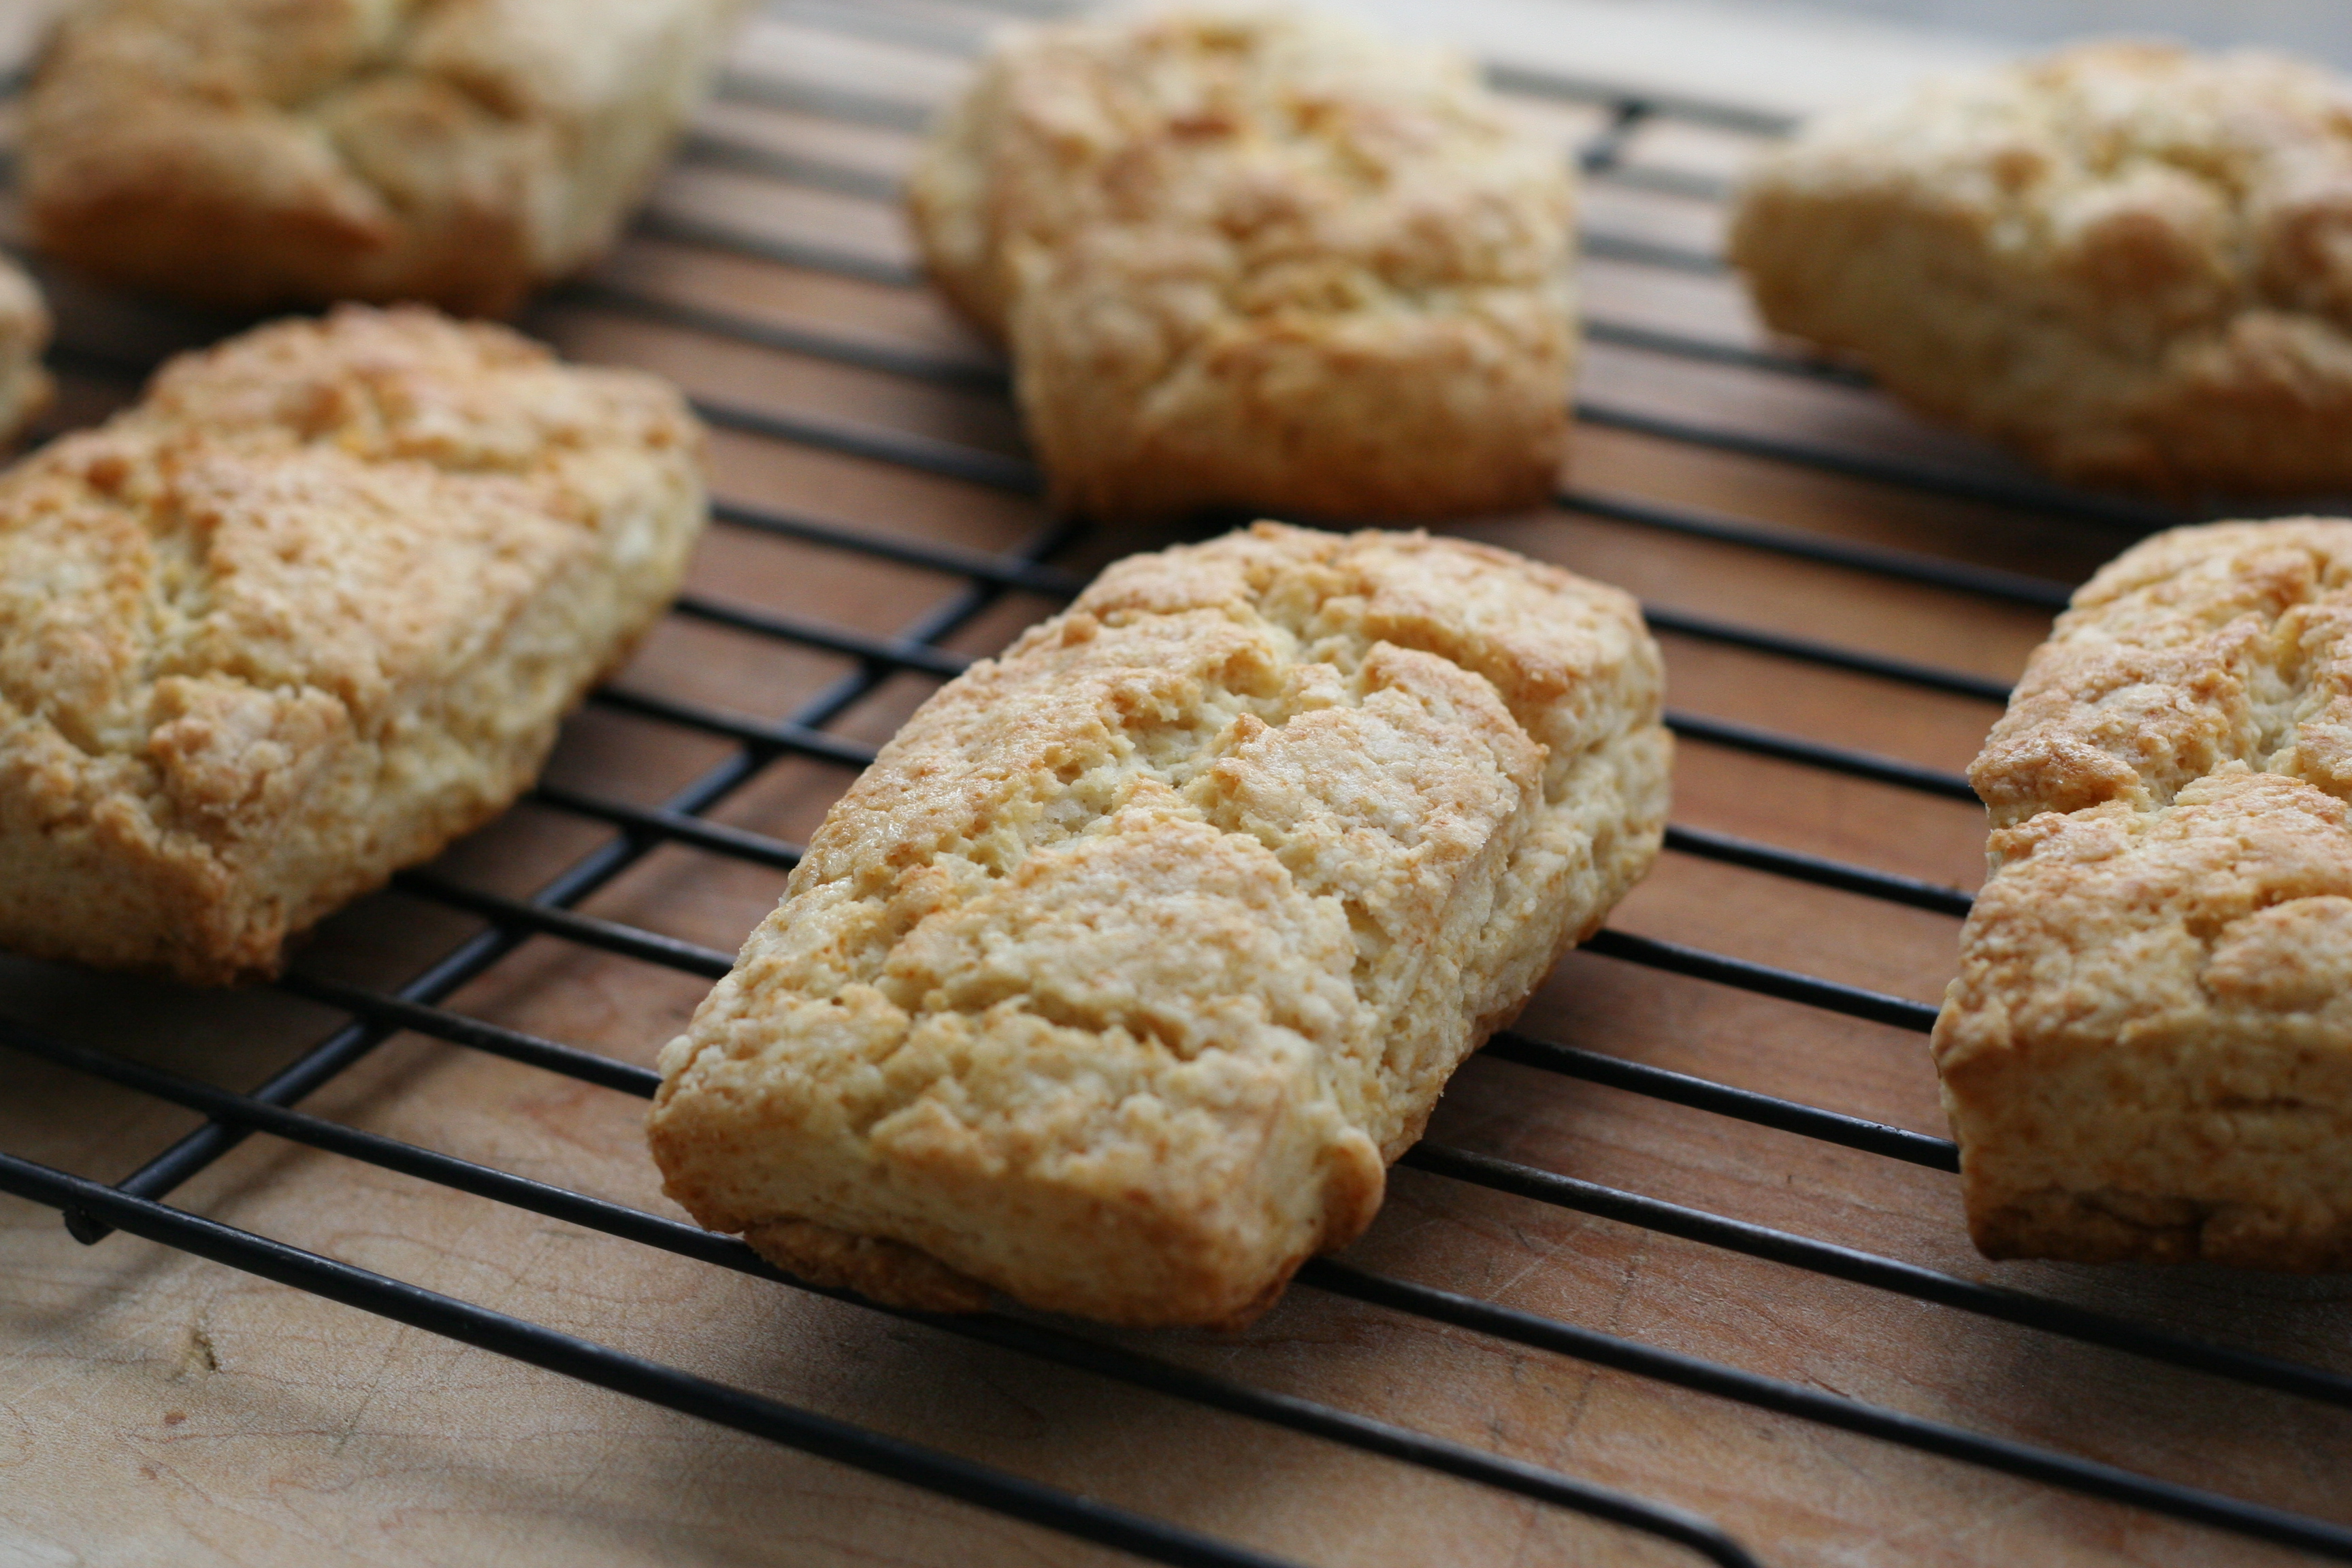 When out of the oven, cool the biscuits on a rack.